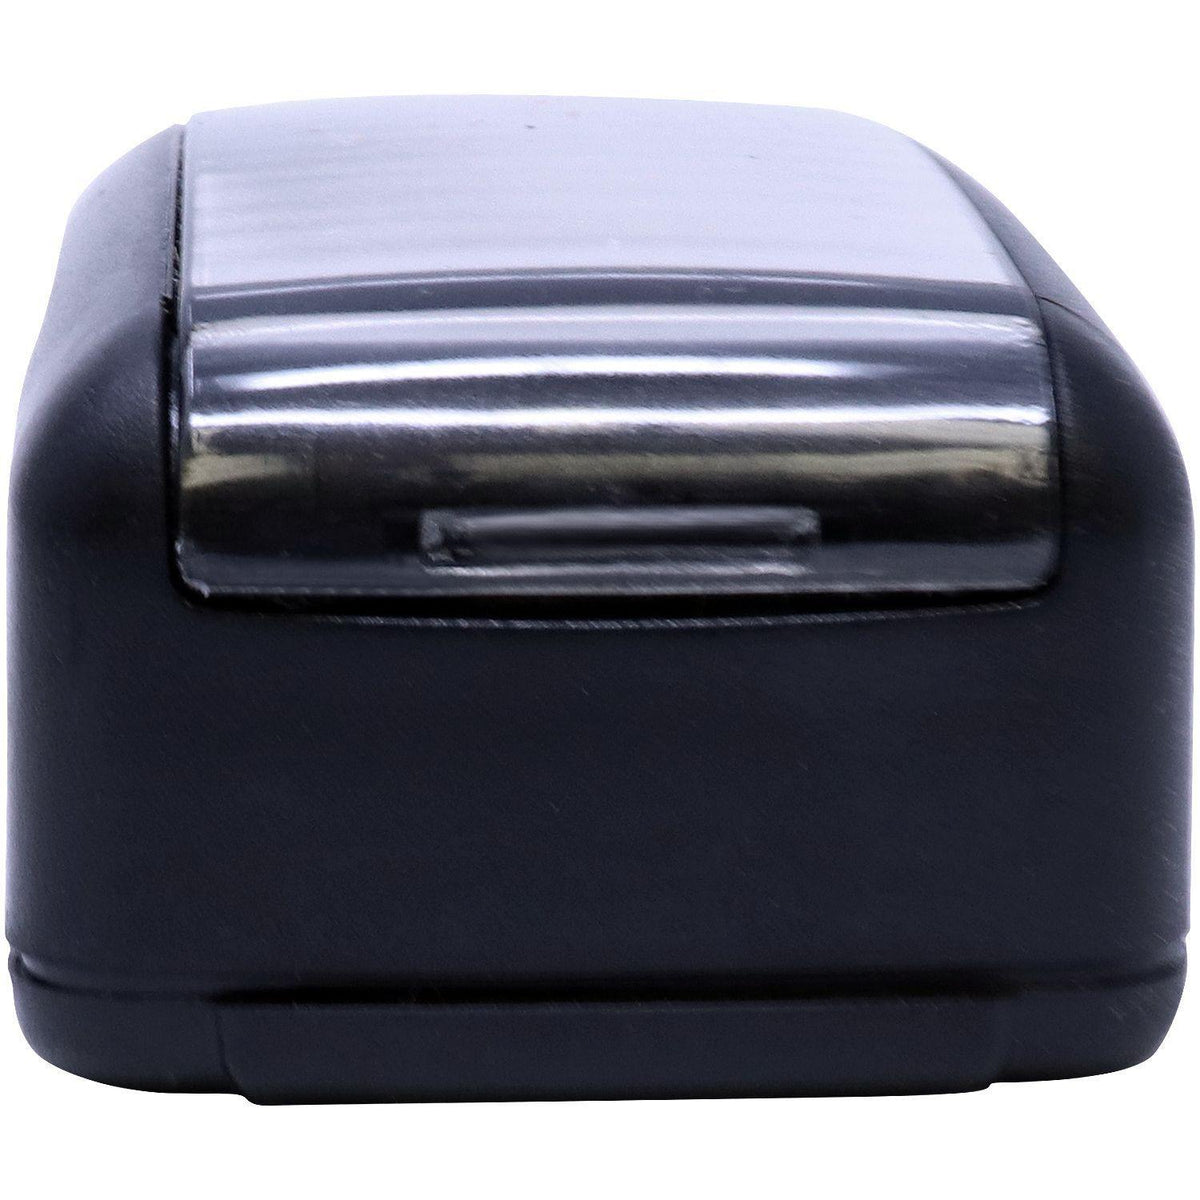 Large Pre Inked Confidential Stamp Side View